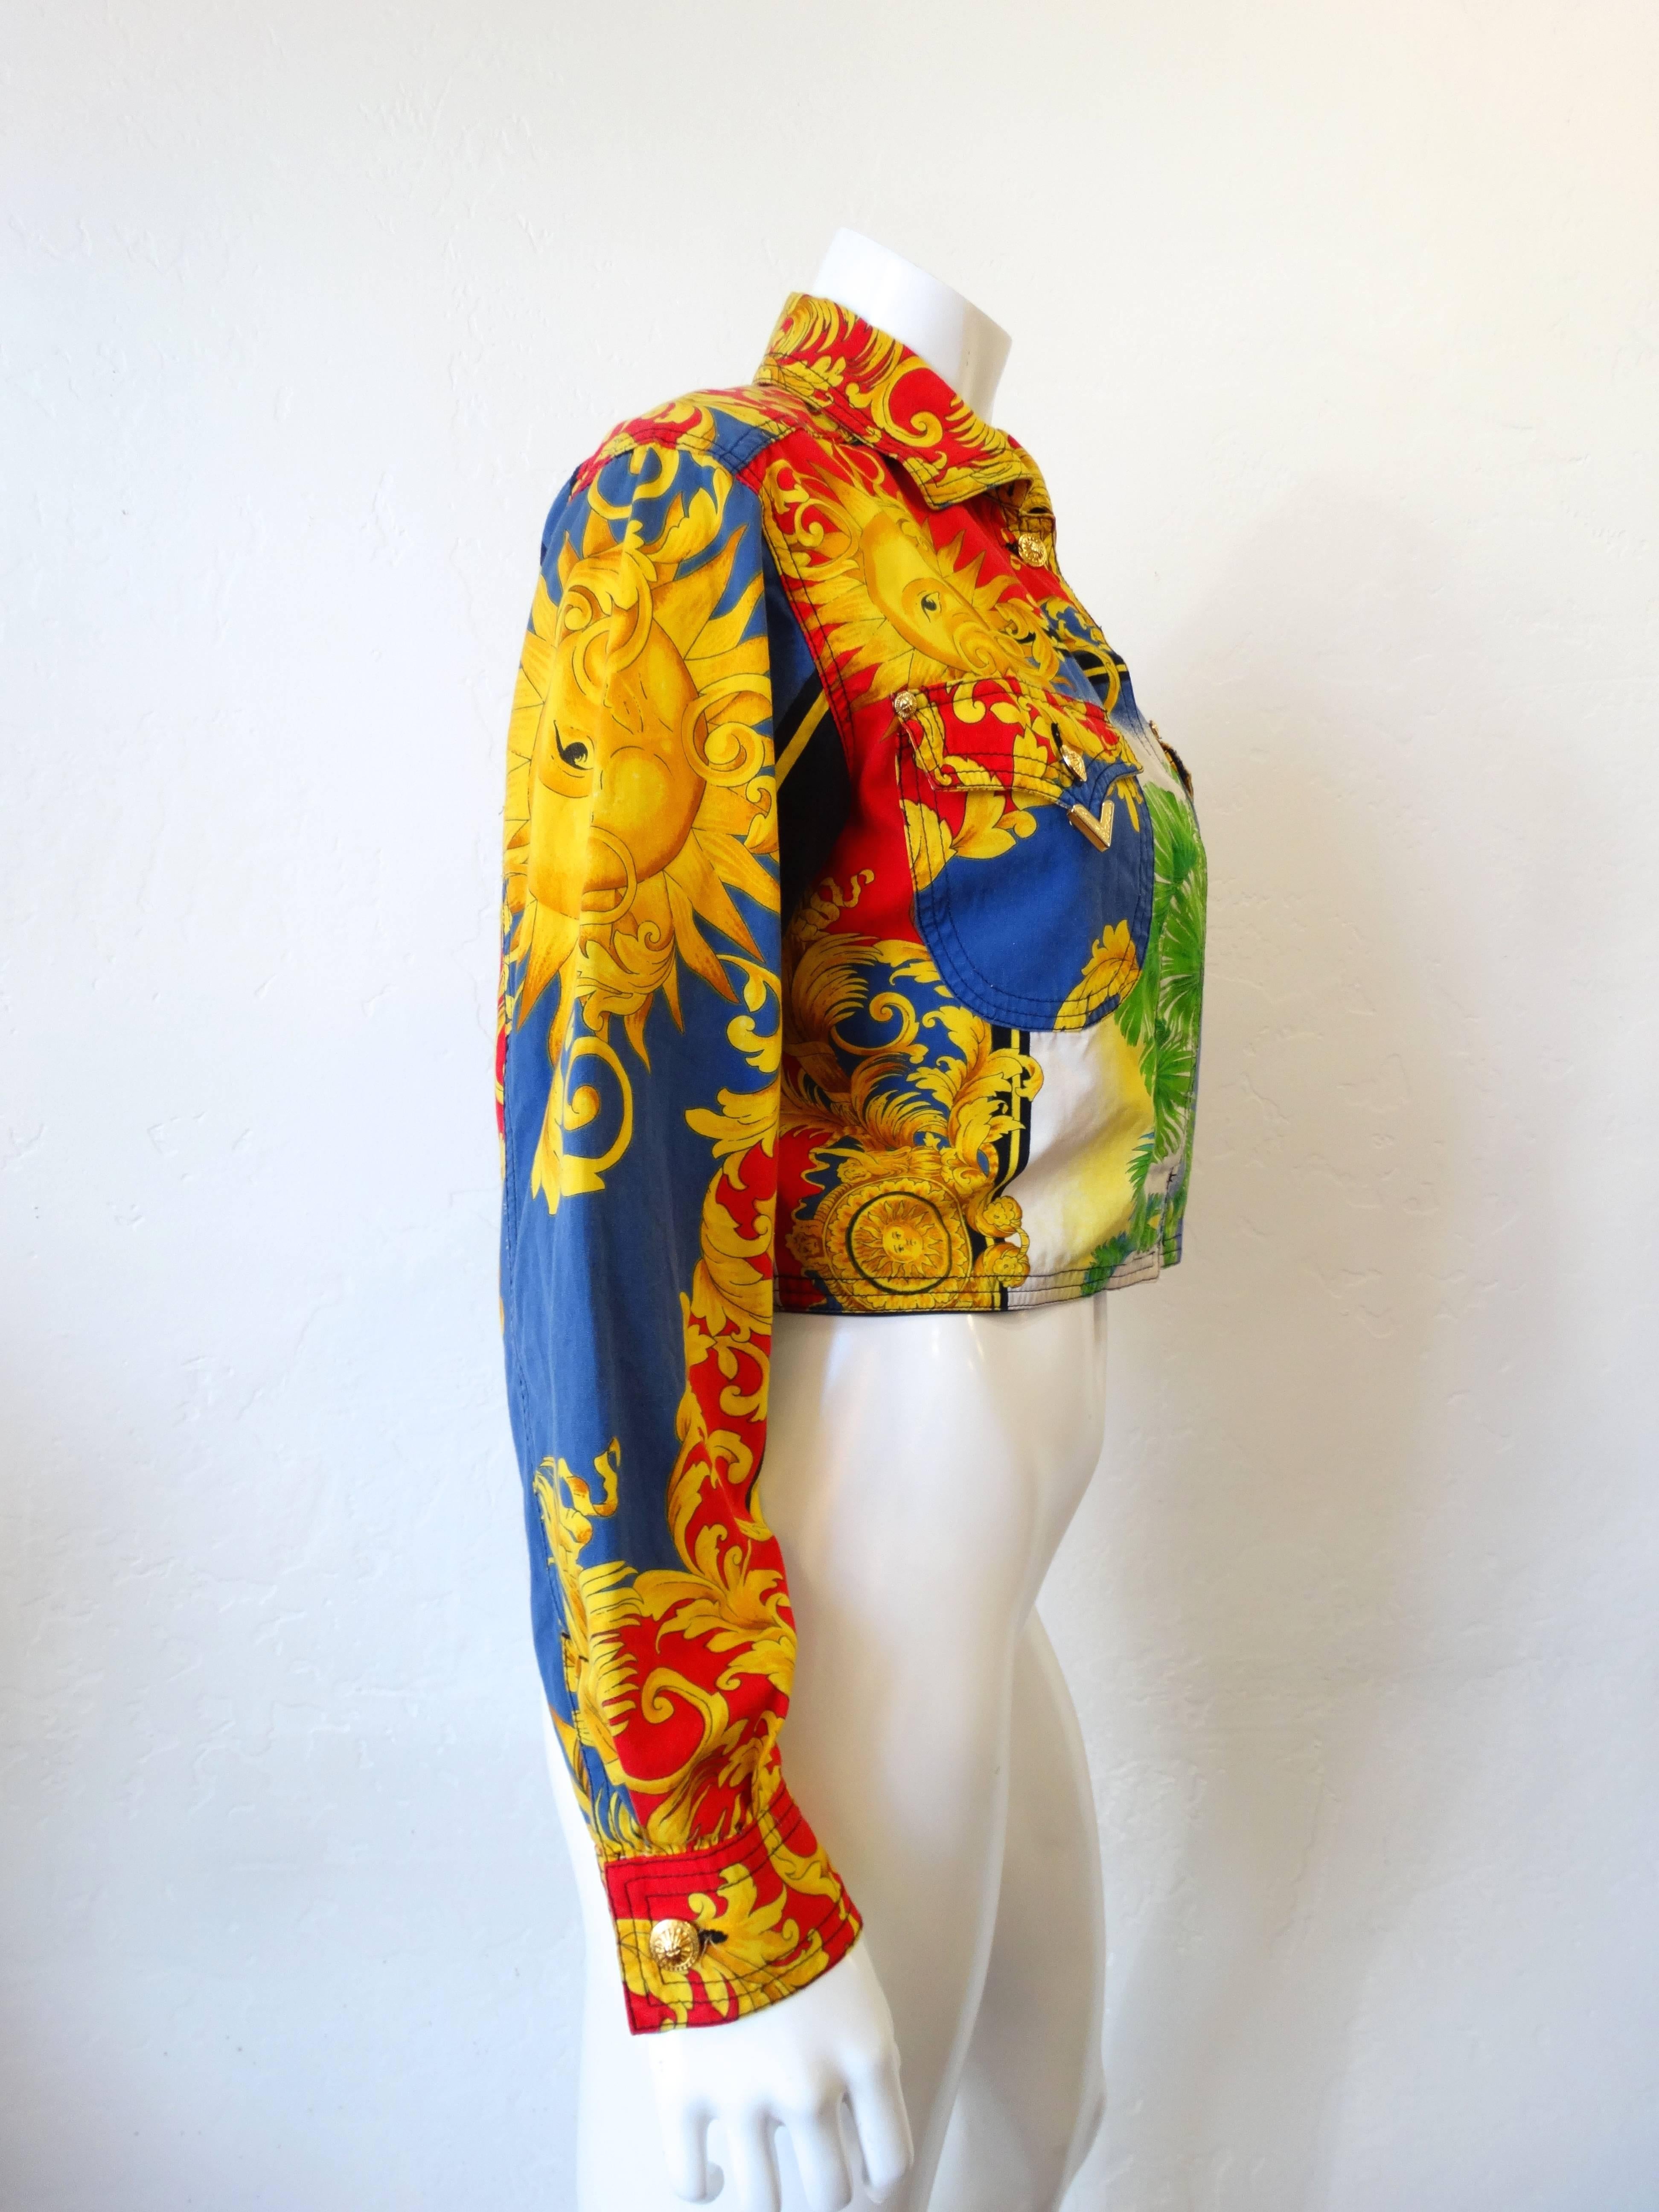 Iconic Multi-coloured cotton sun baroque print jacket from Versace circa 1993 featuring a classic collar, long sleeves, button cuffs, a top button, a concealed front fastening, two chest pockets and a cropped length. Miami print..

Italian fashion